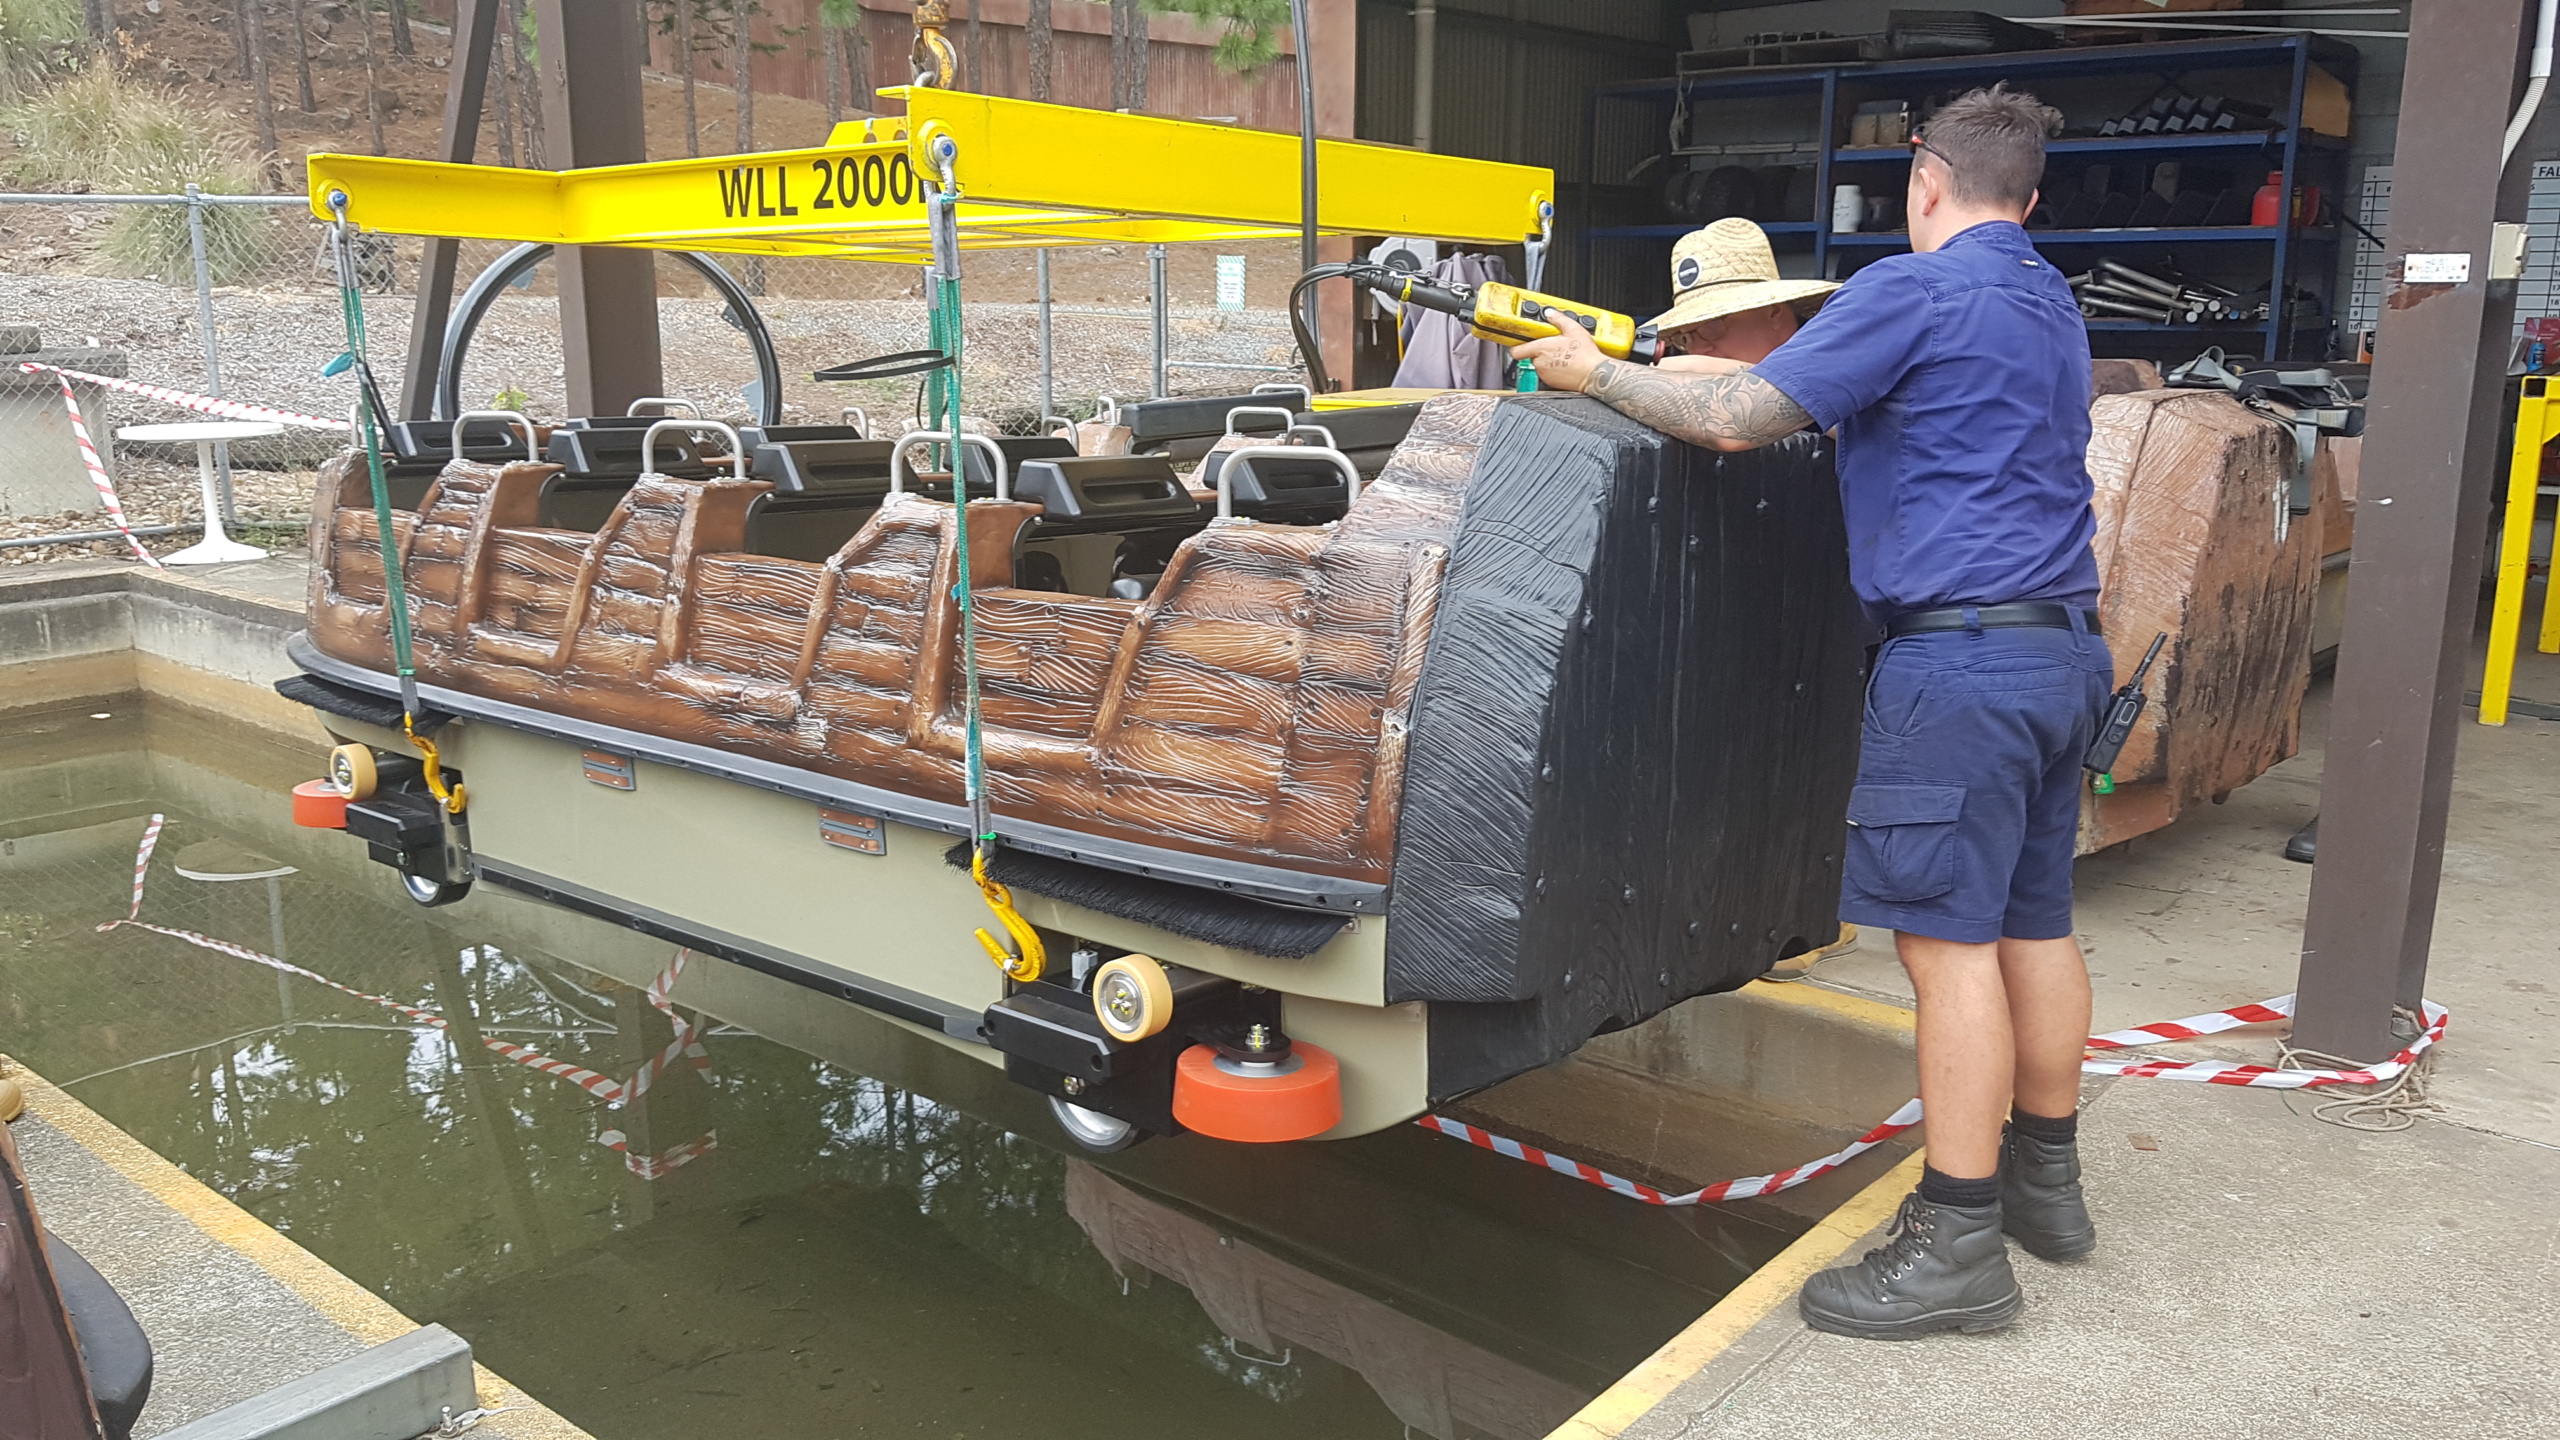 Water ride boat being serviced by crew